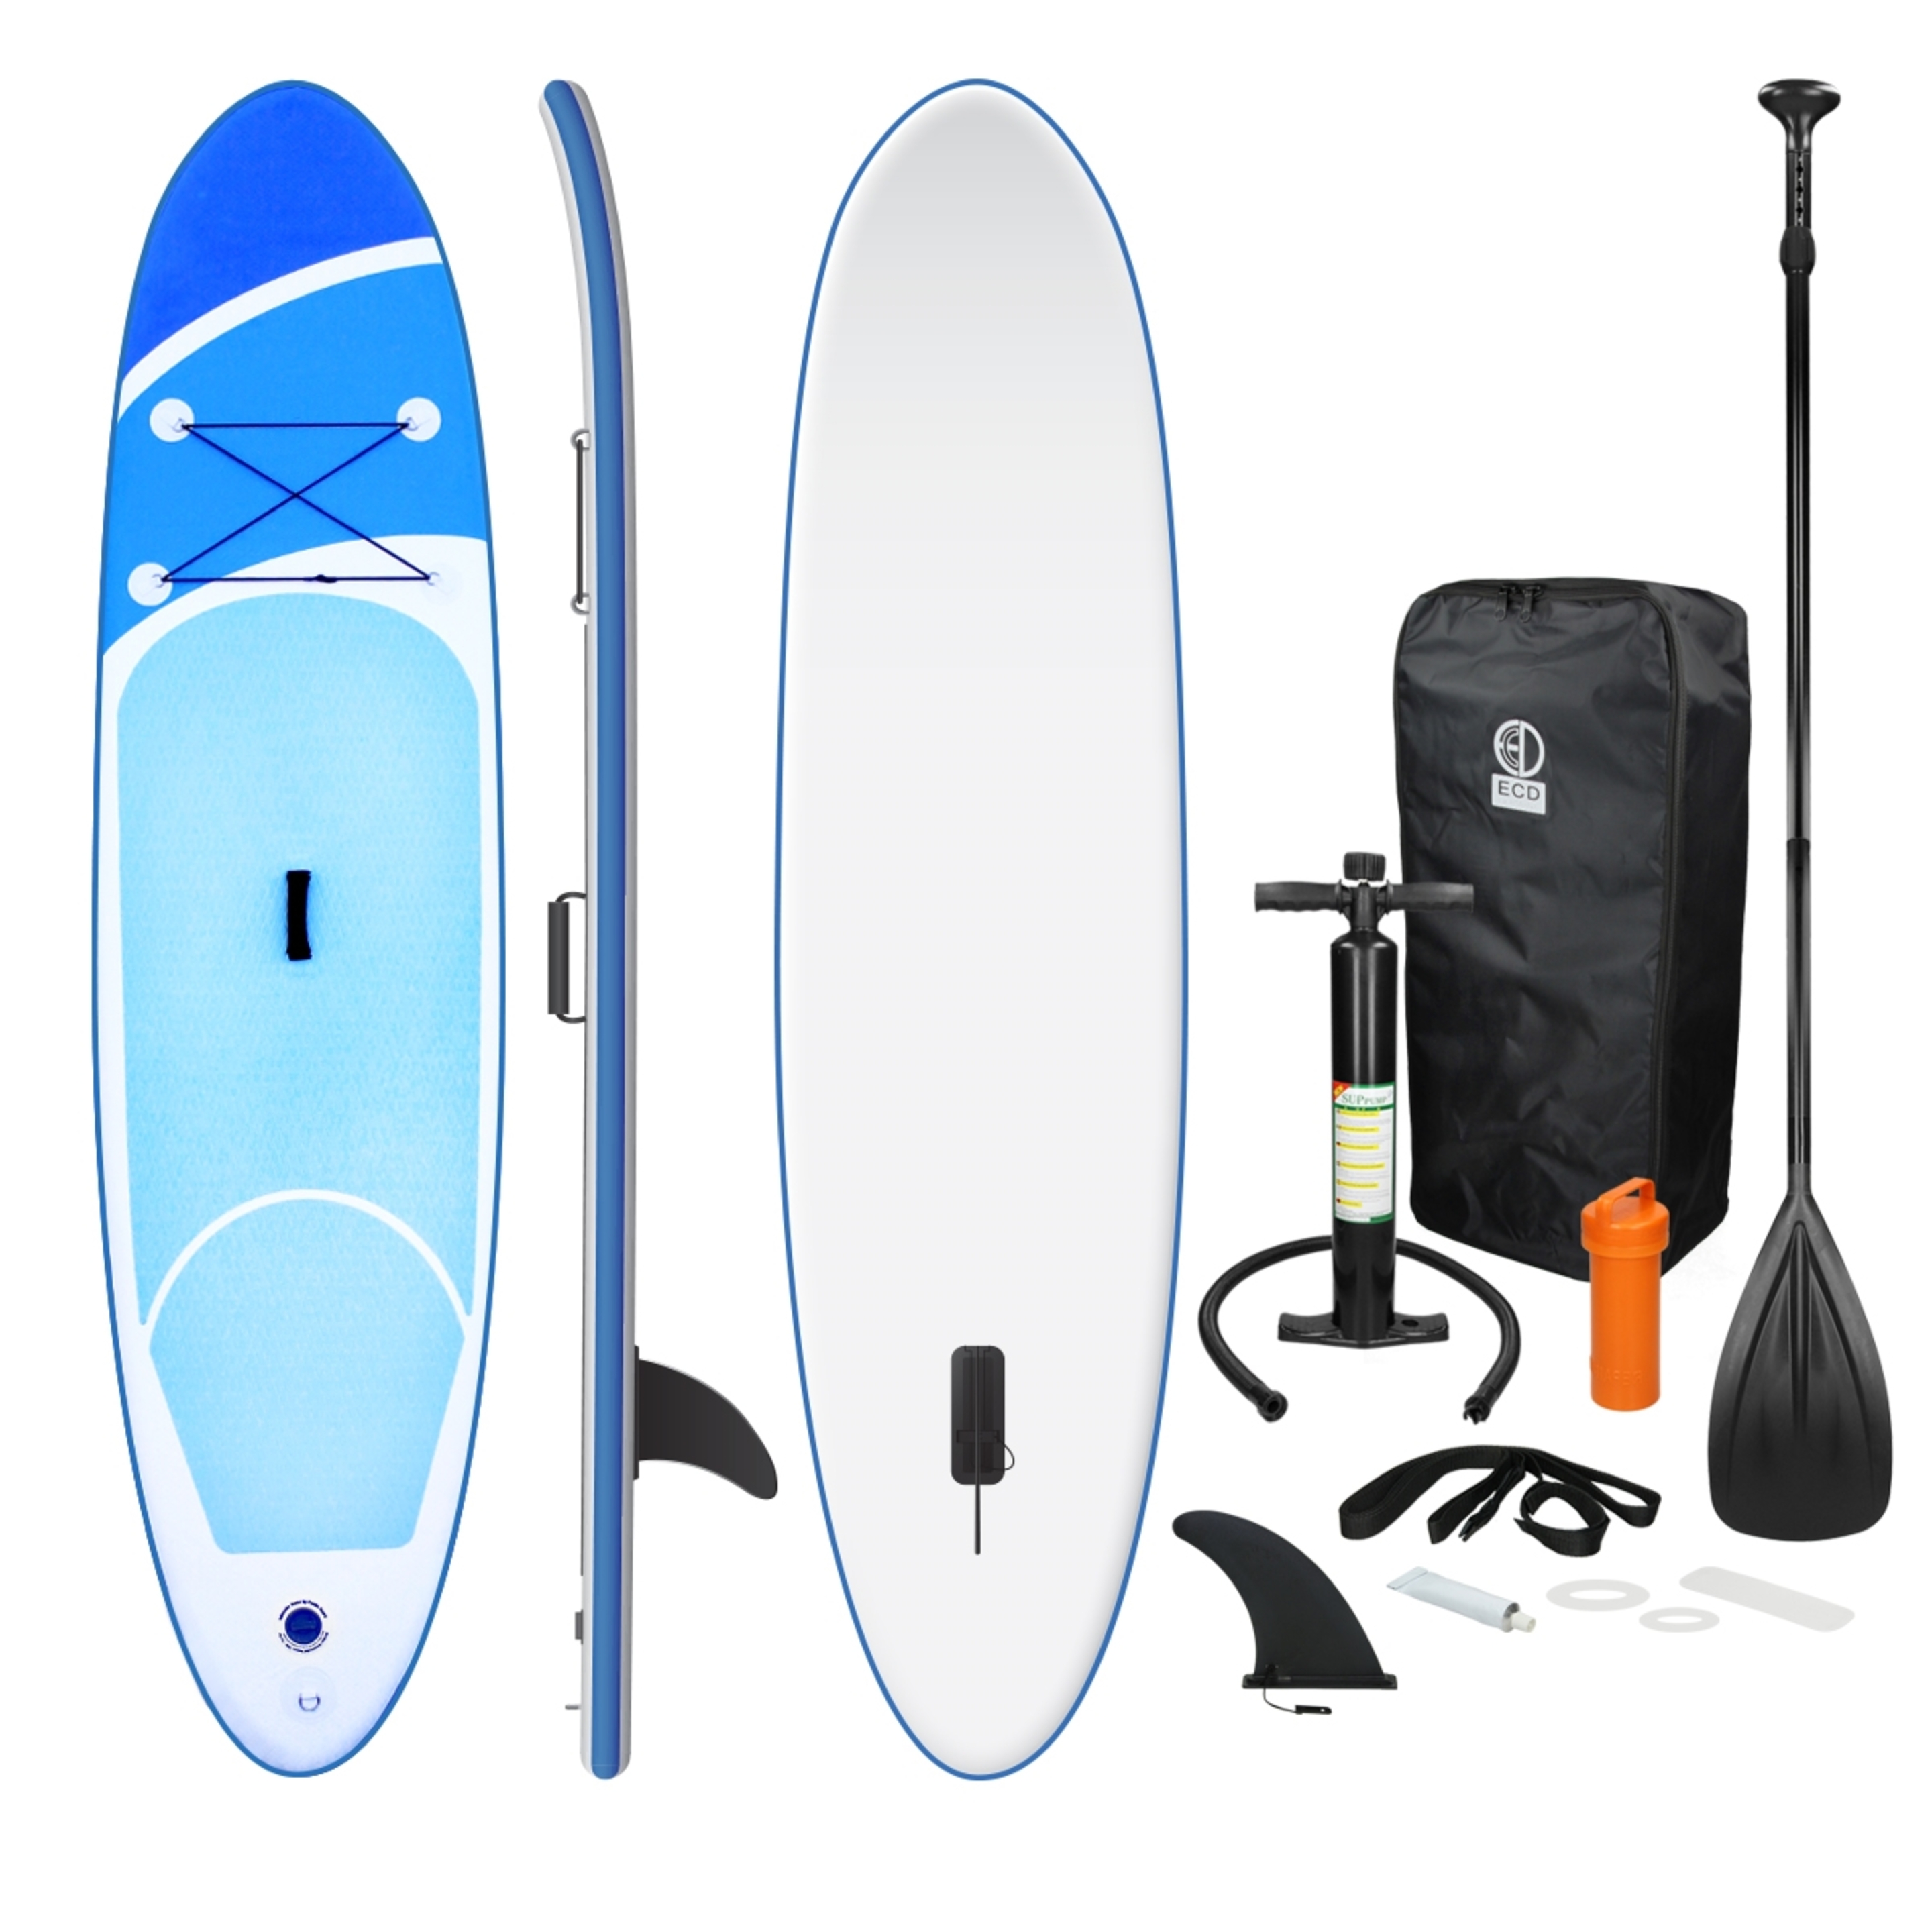 Prancha Sup Stand Up Paddle Surf-board Hinchable Incluye Remo 308x76x10 Cm Azul